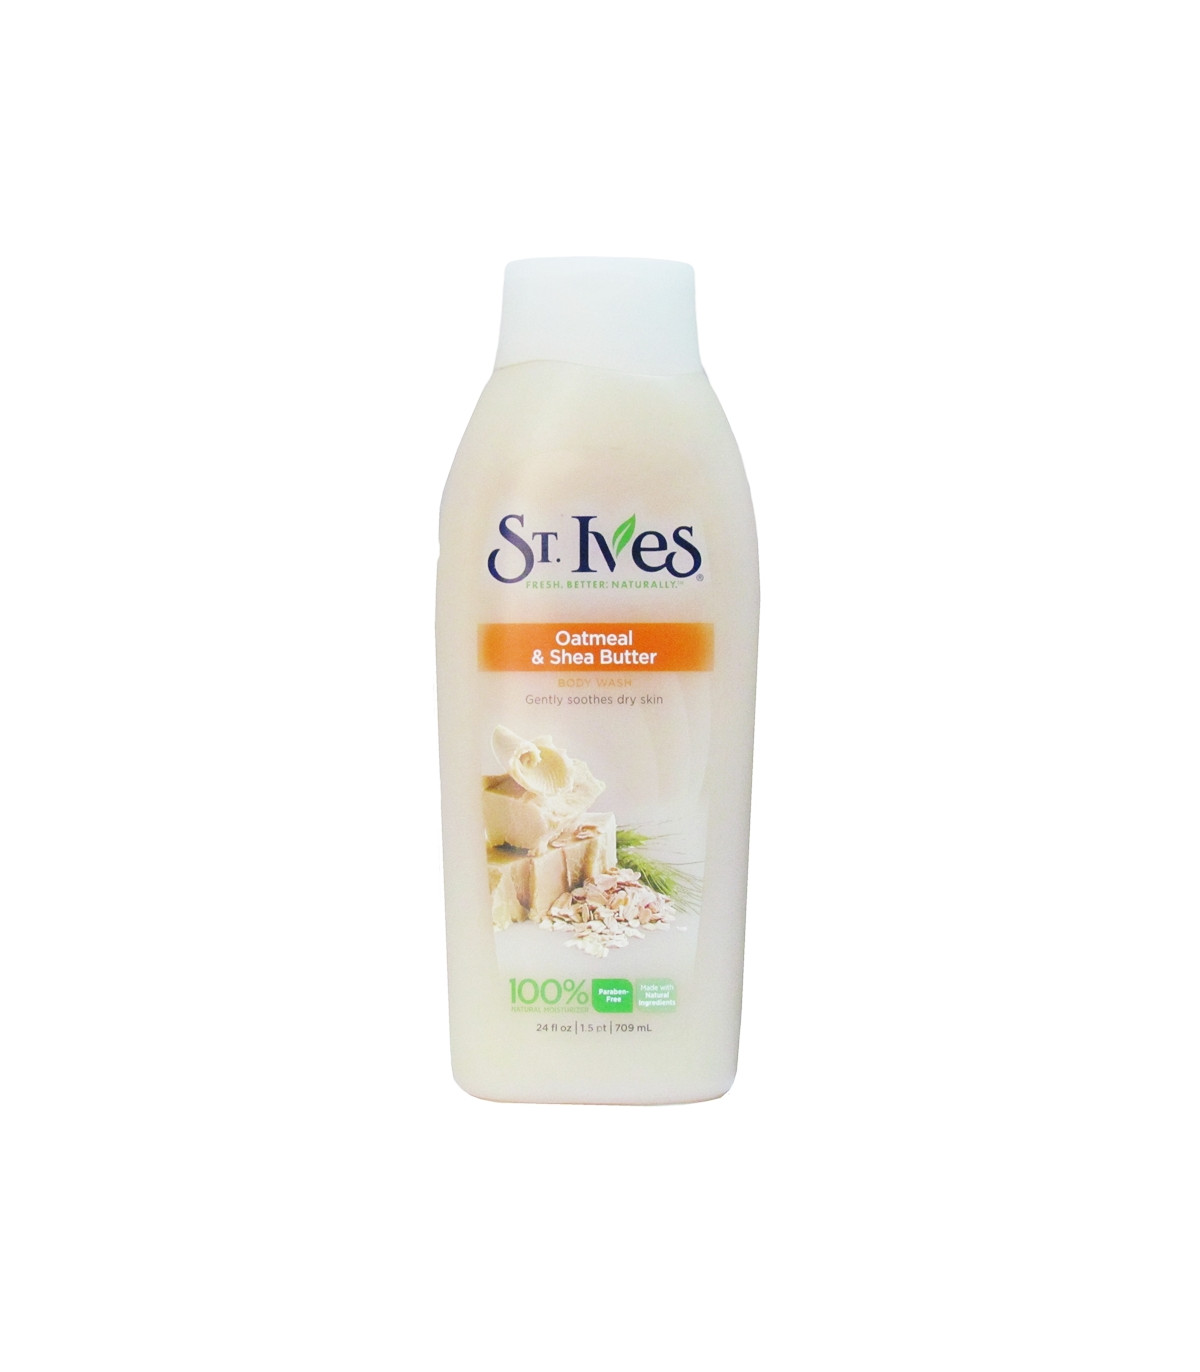 St Ives Oatmeal & Shea Butter Hydrating Body Wash – 709ml